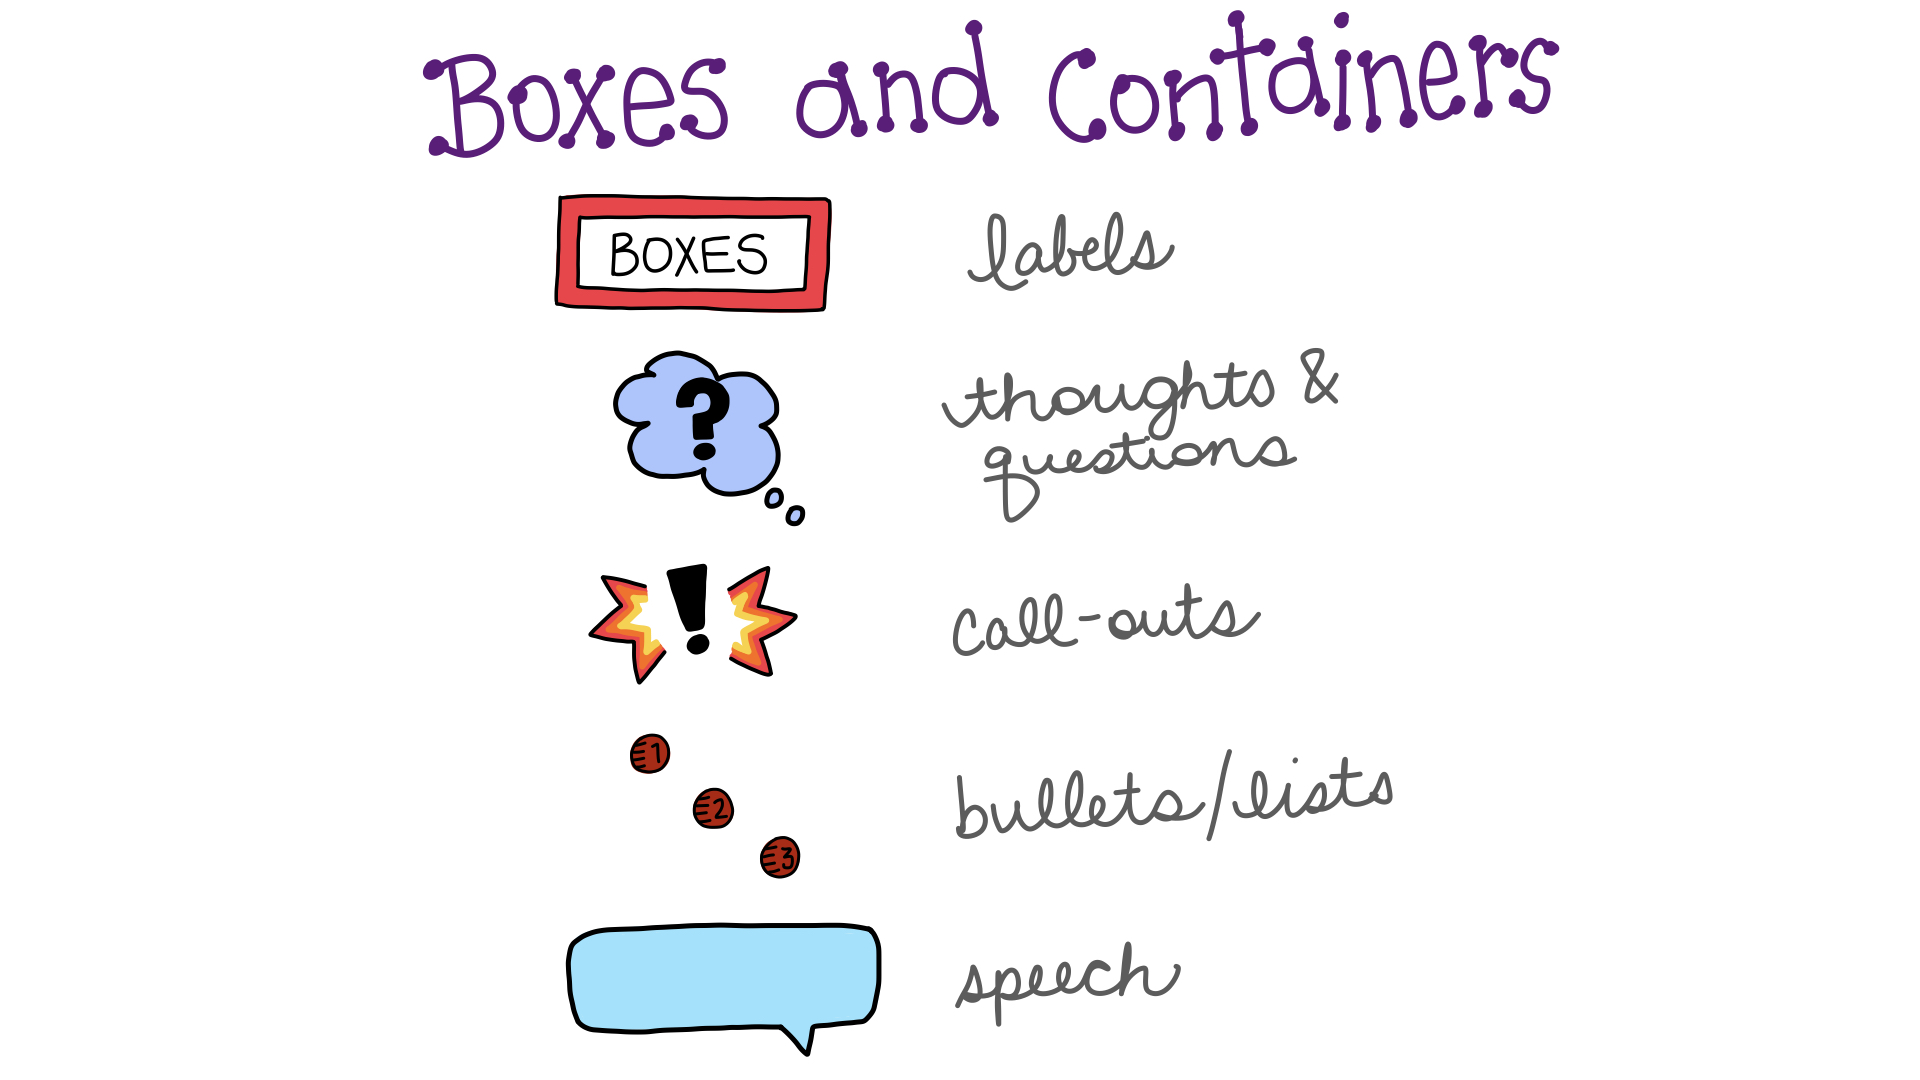 Boxes and containers can highlight or call out important ideas or thinking